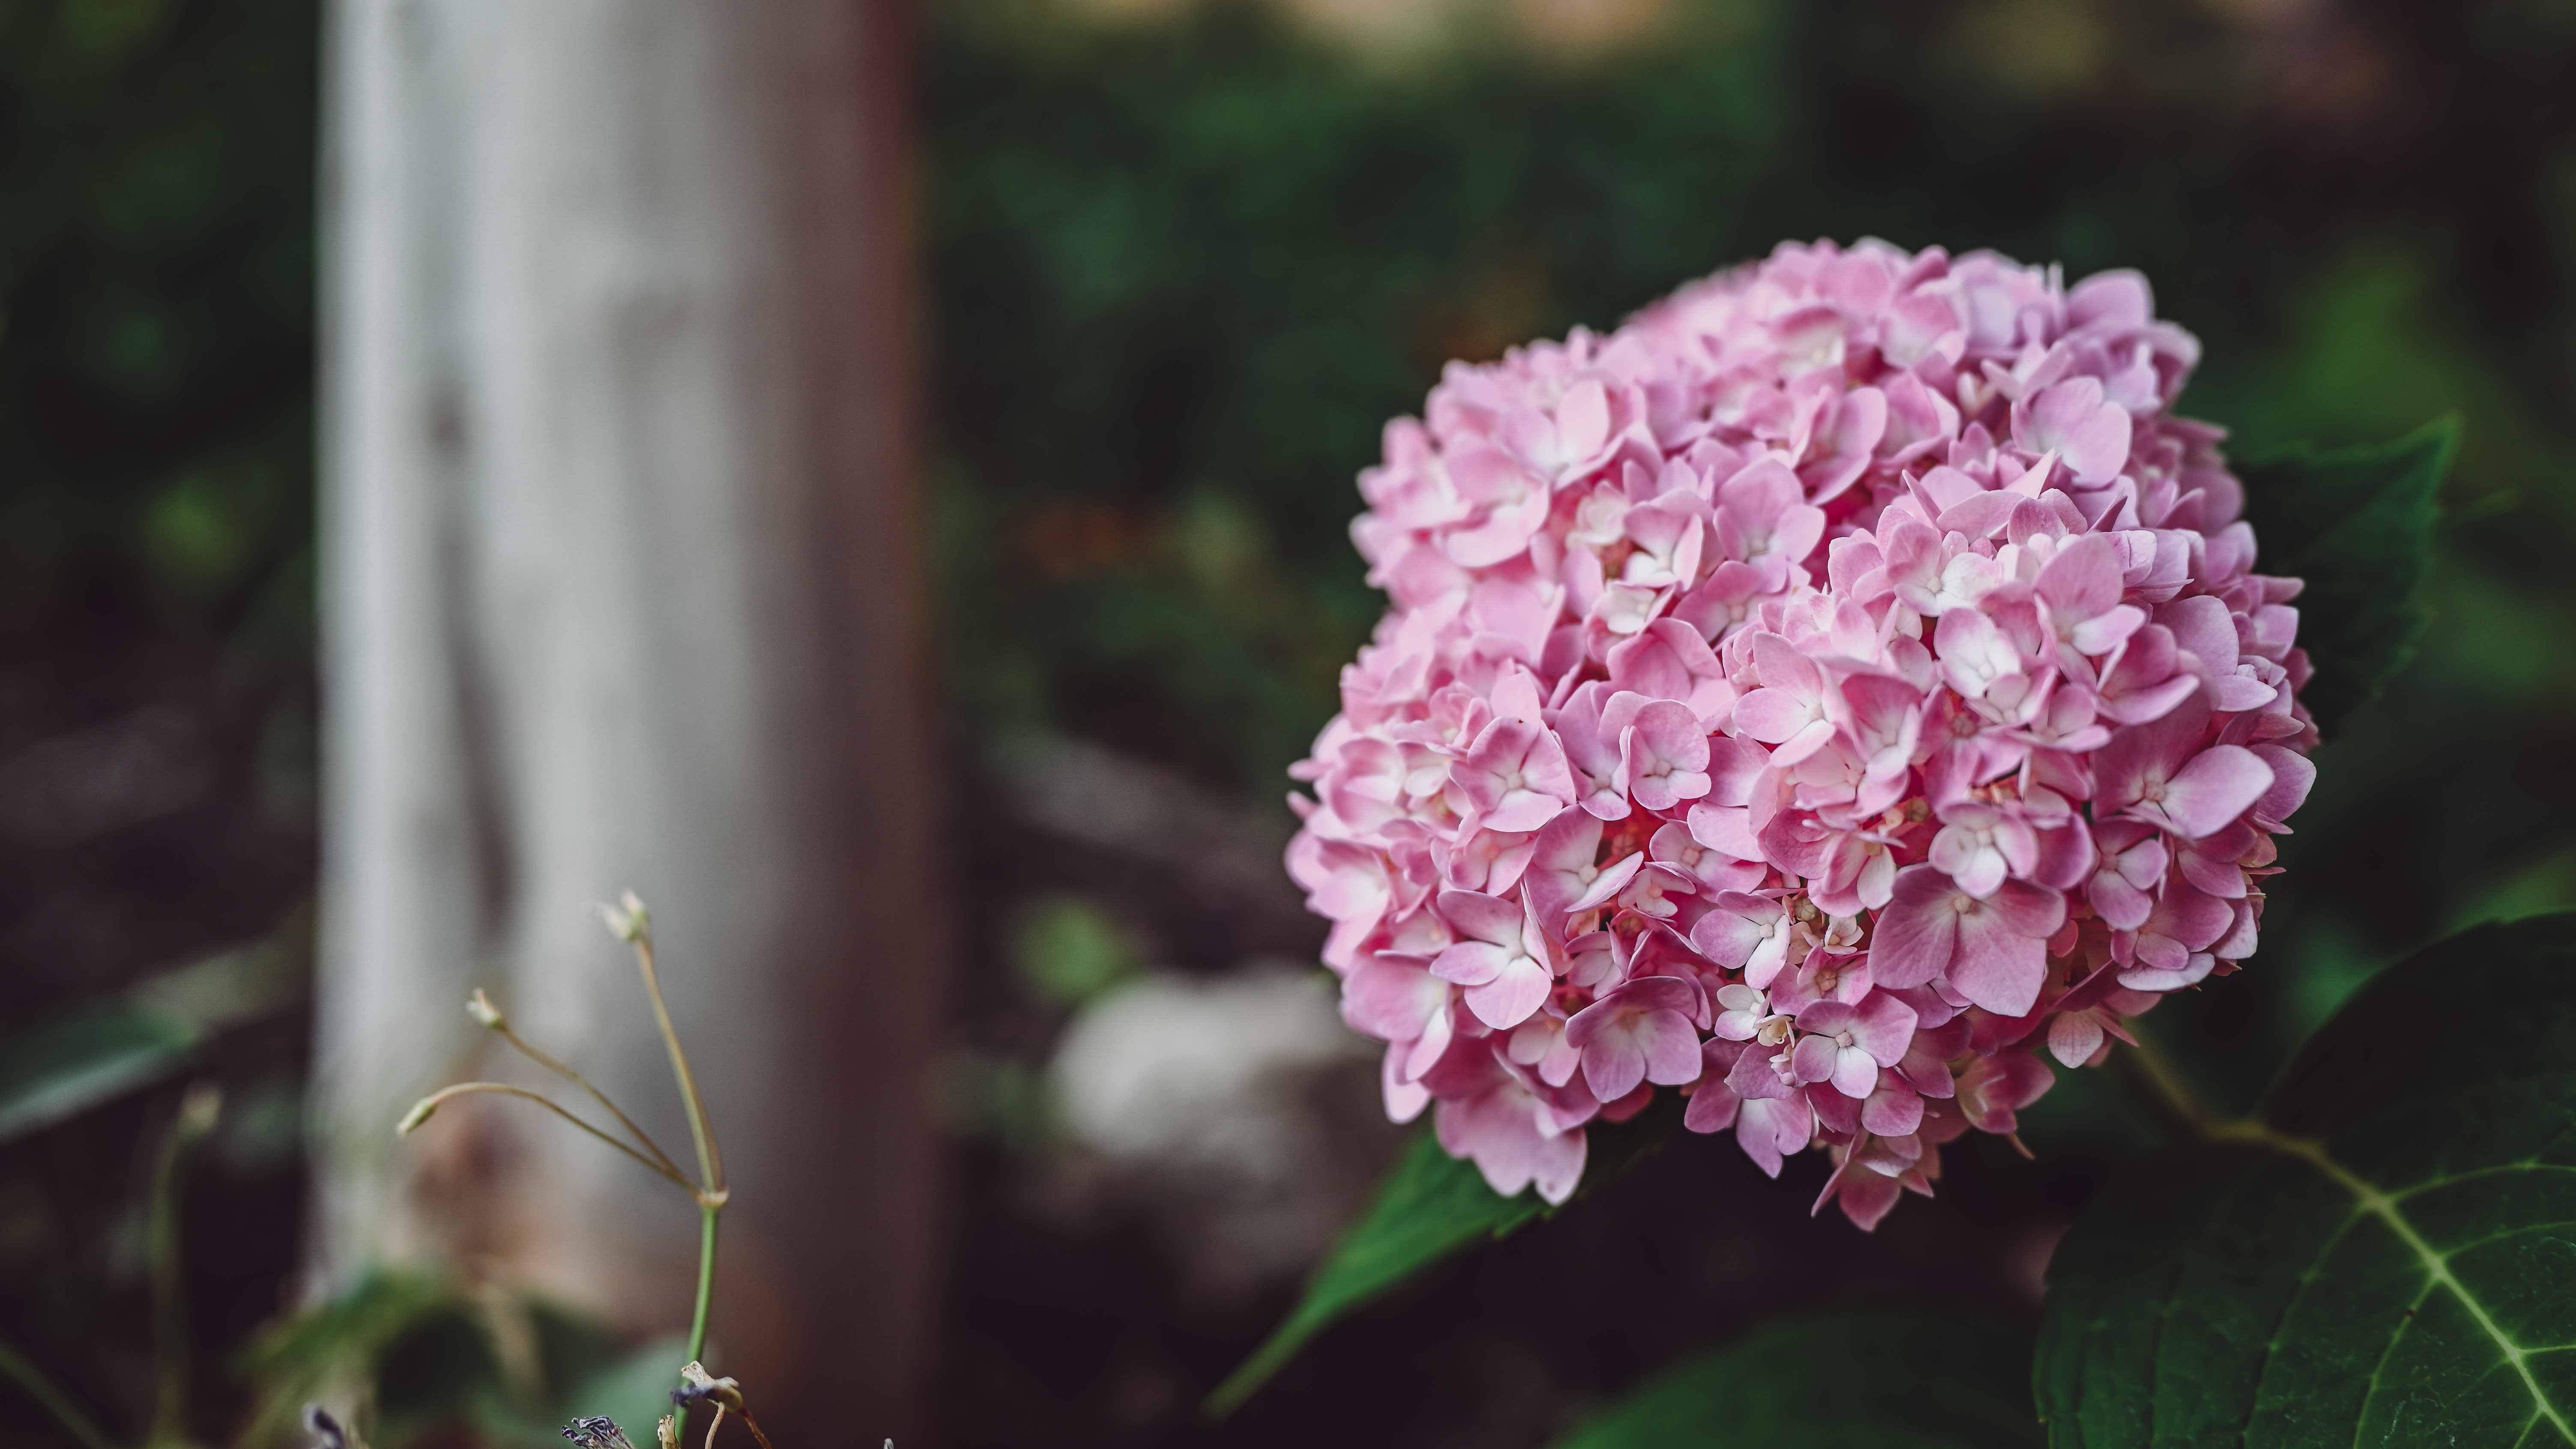 Flowers Nature Plants Pink Flowers Summer Outdoors Photography 6016x3384